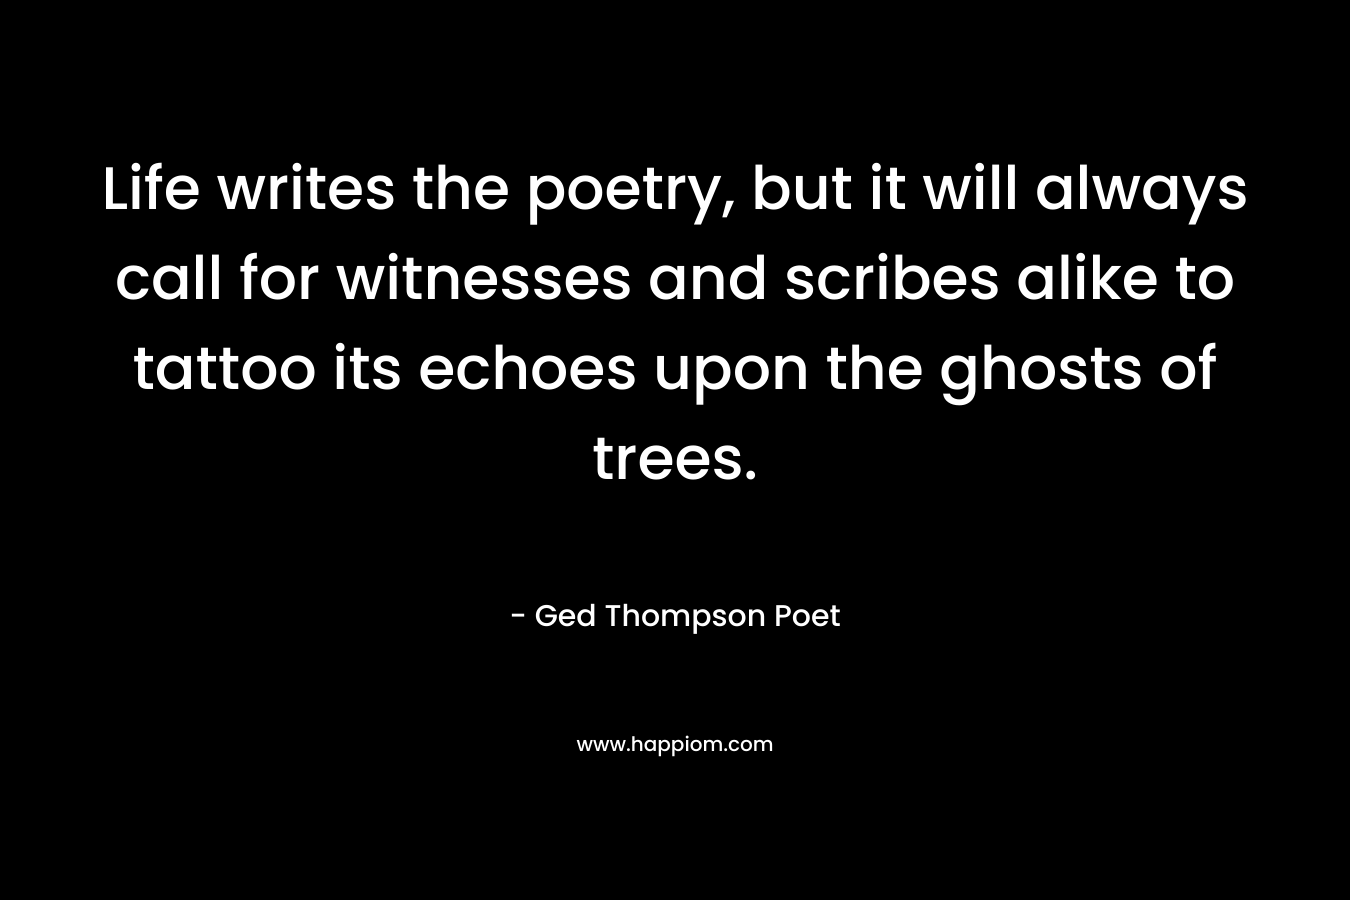 Life writes the poetry, but it will always call for witnesses and scribes alike to tattoo its echoes upon the ghosts of trees. – Ged Thompson Poet